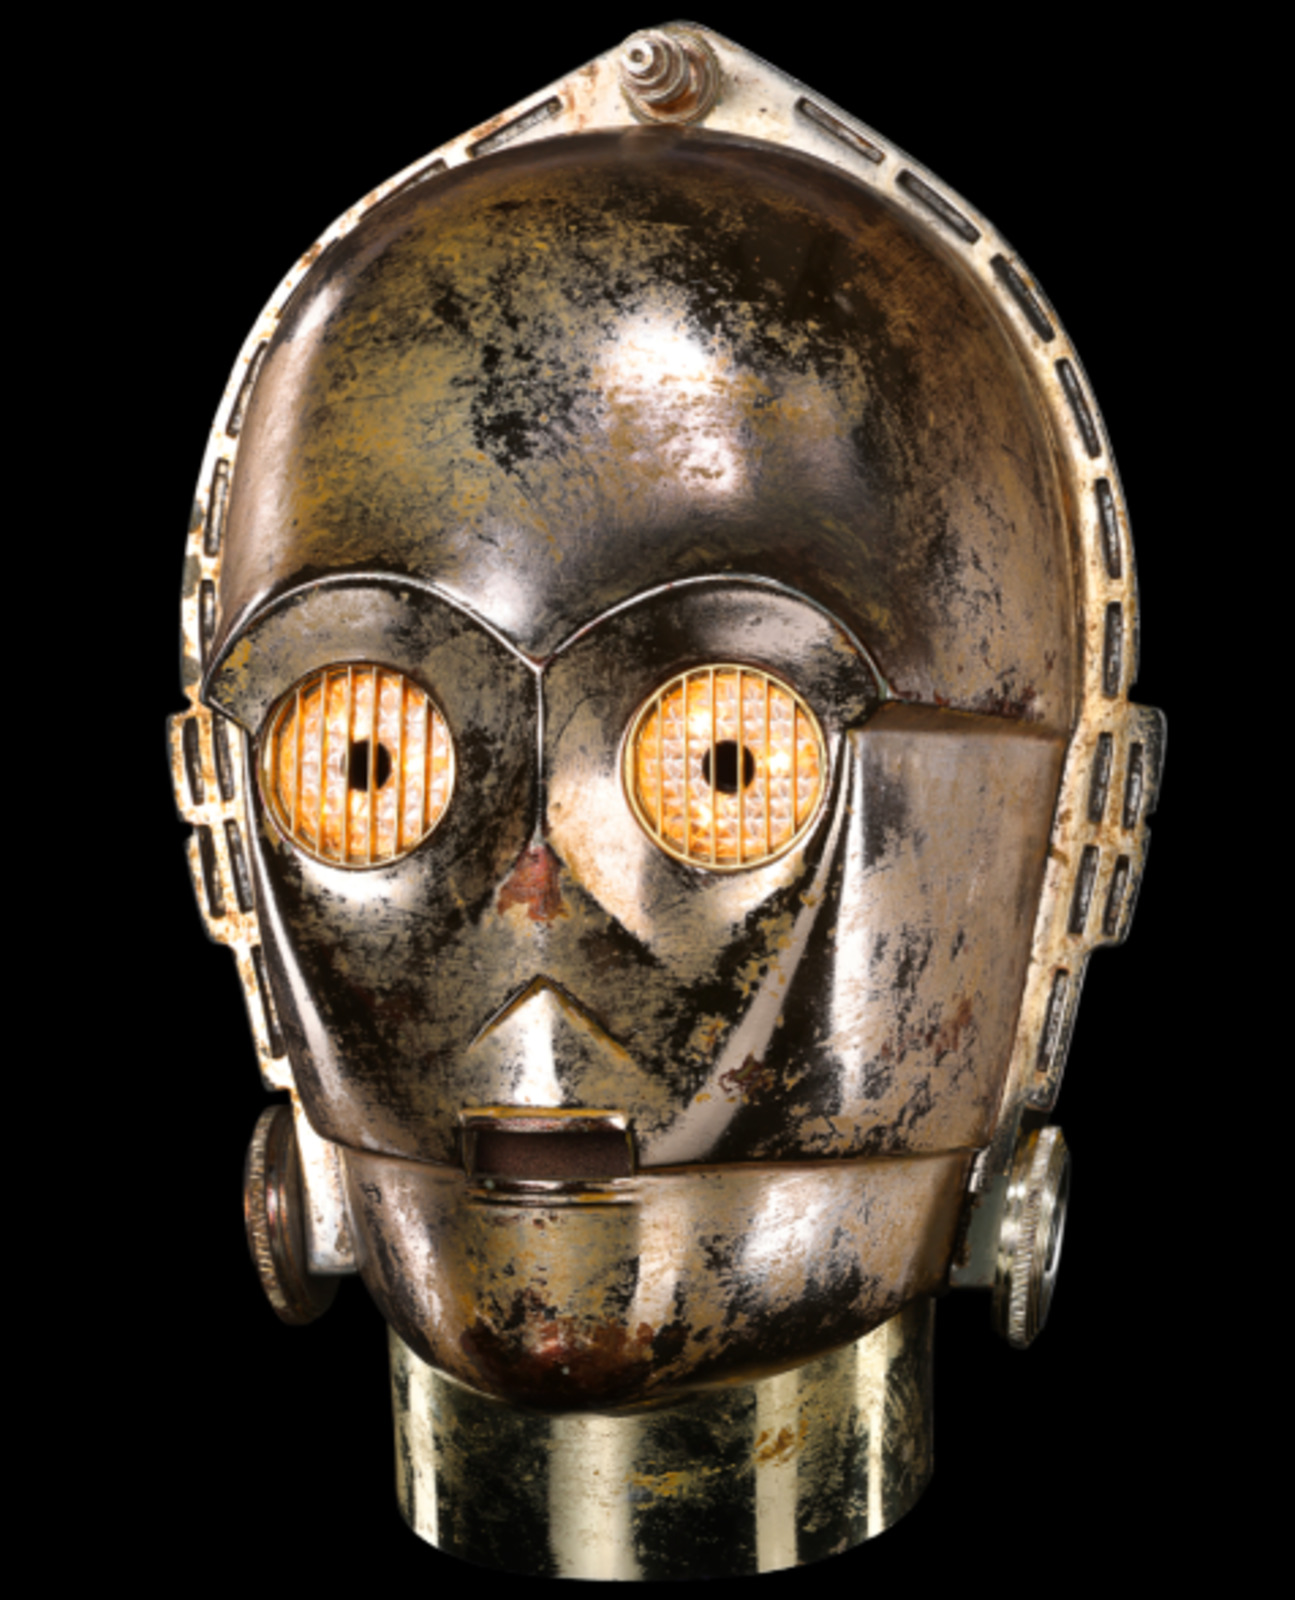 C-3PO head up for auction at Propstore